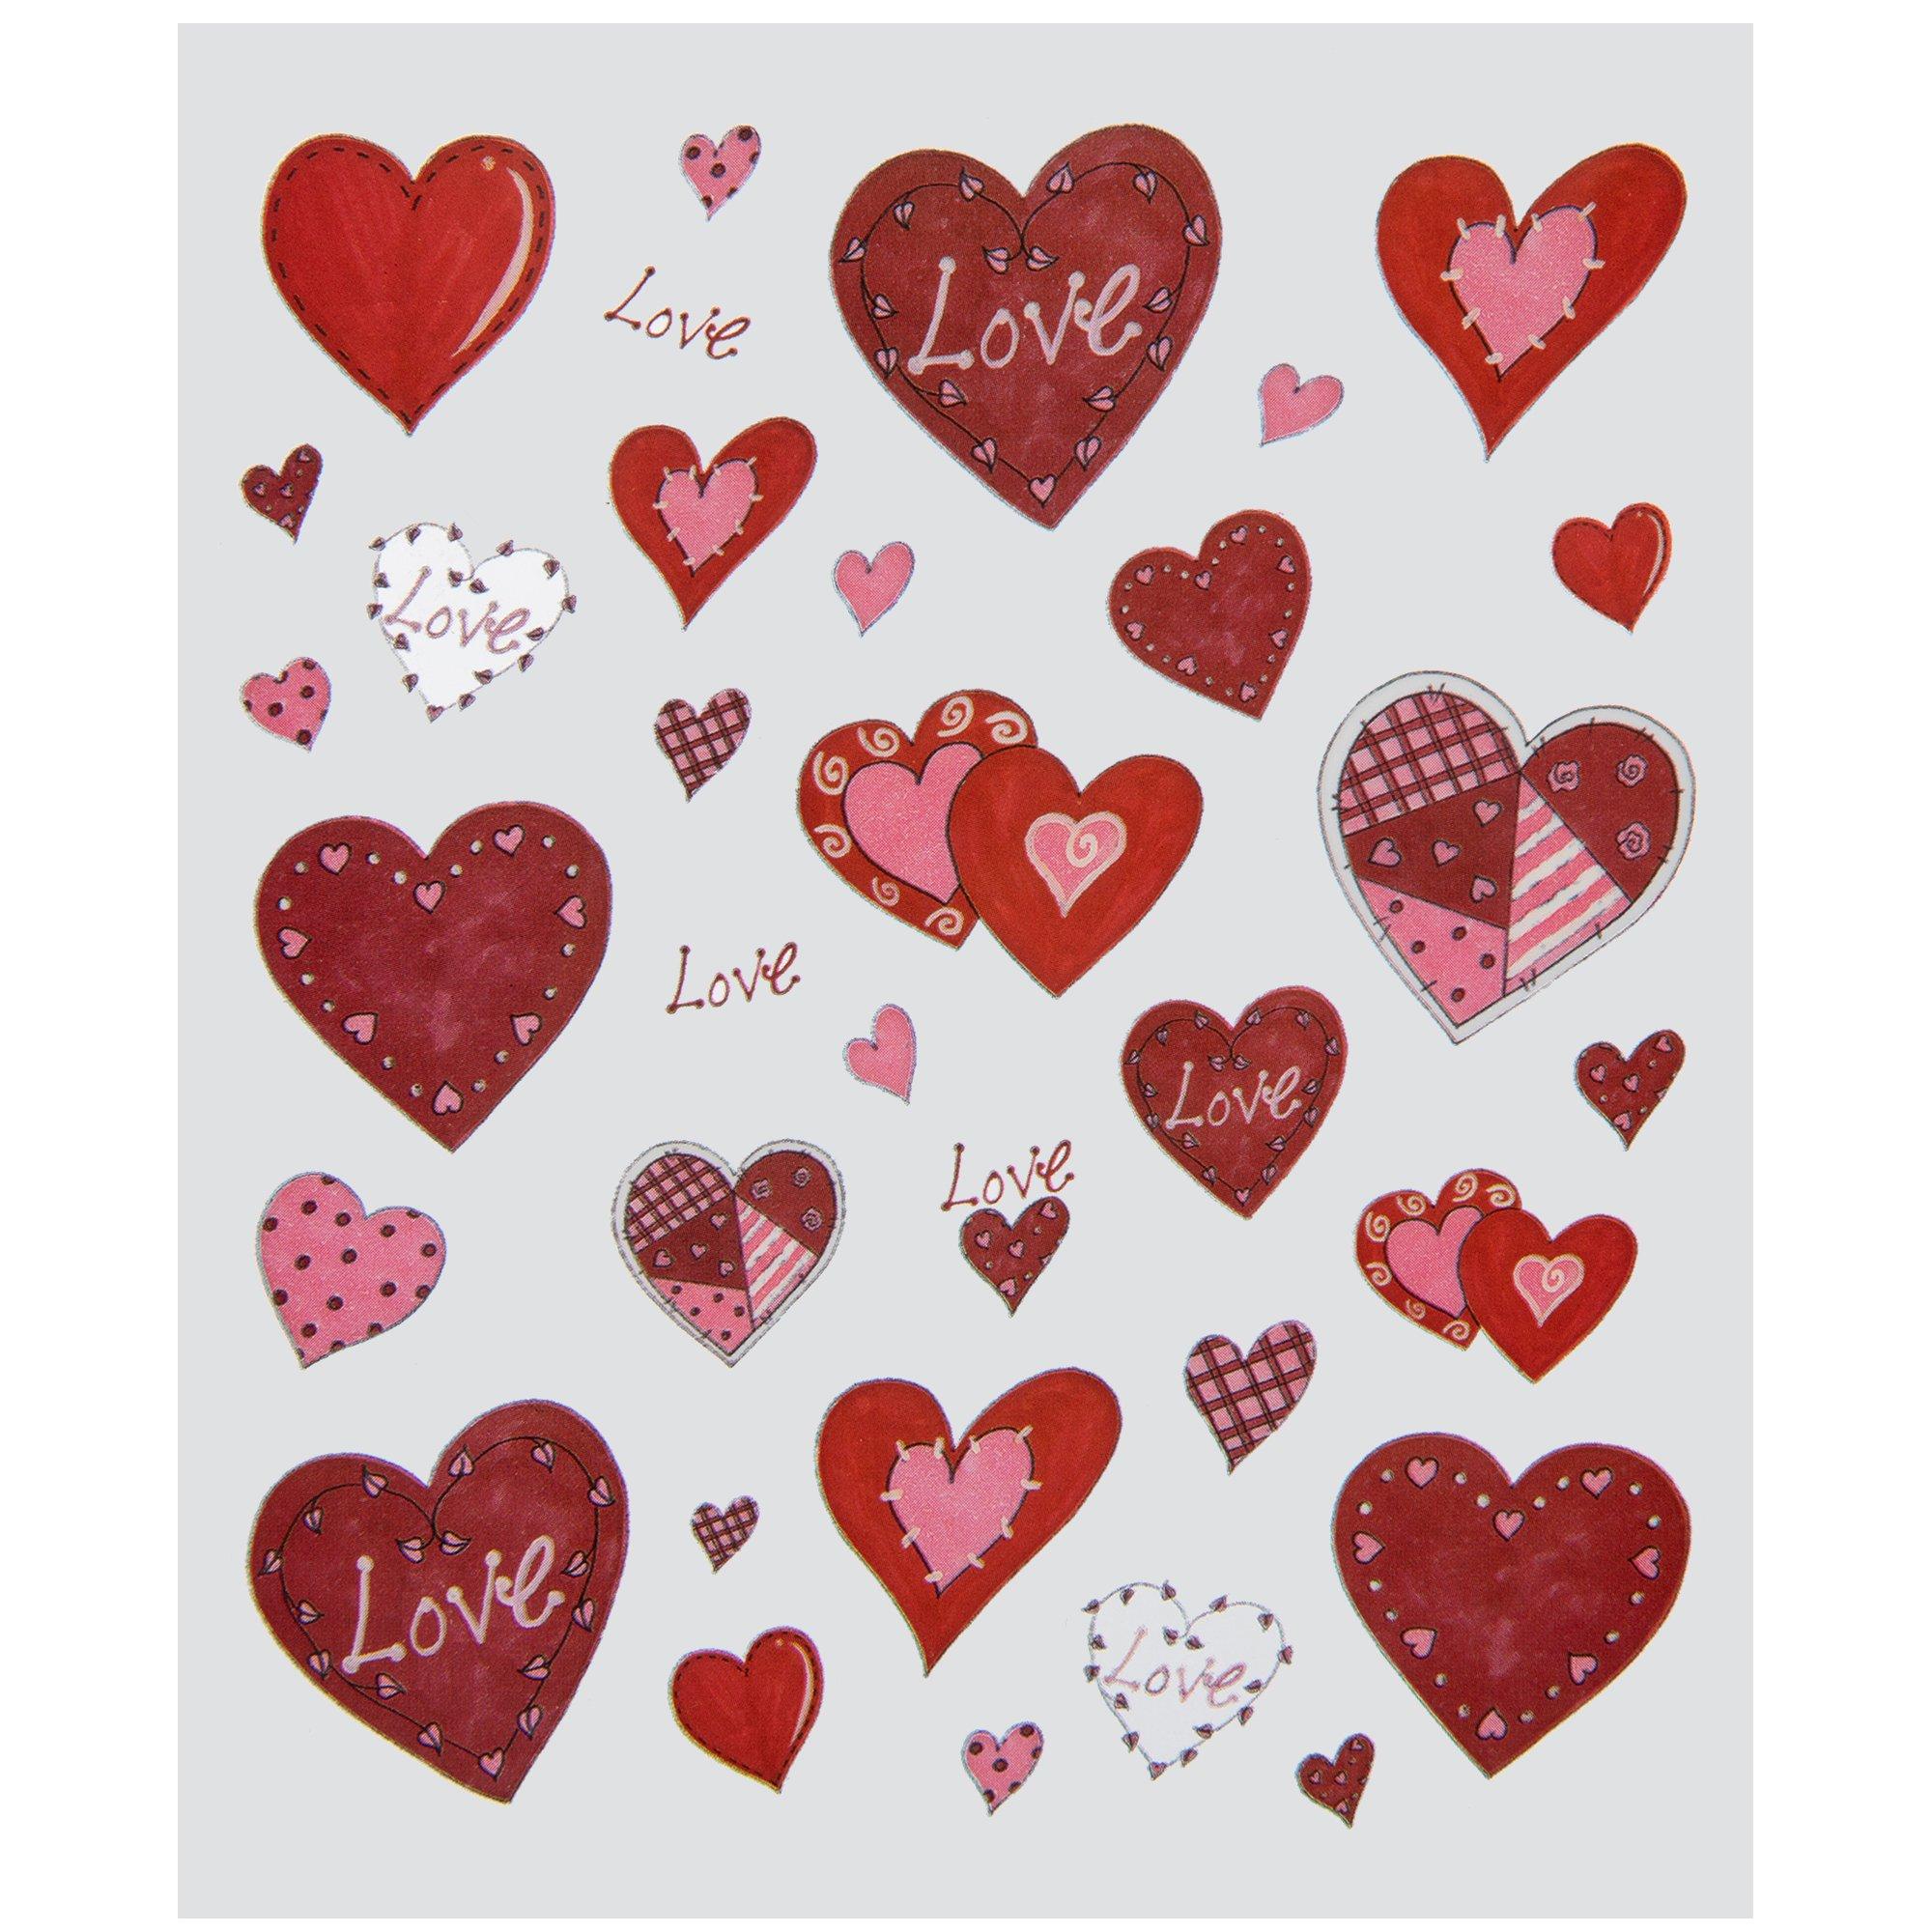 NEW SET OF 40 HEART STICKERS~~ APPROX. 1-1/4 X 1-1/2 (VARIOUS